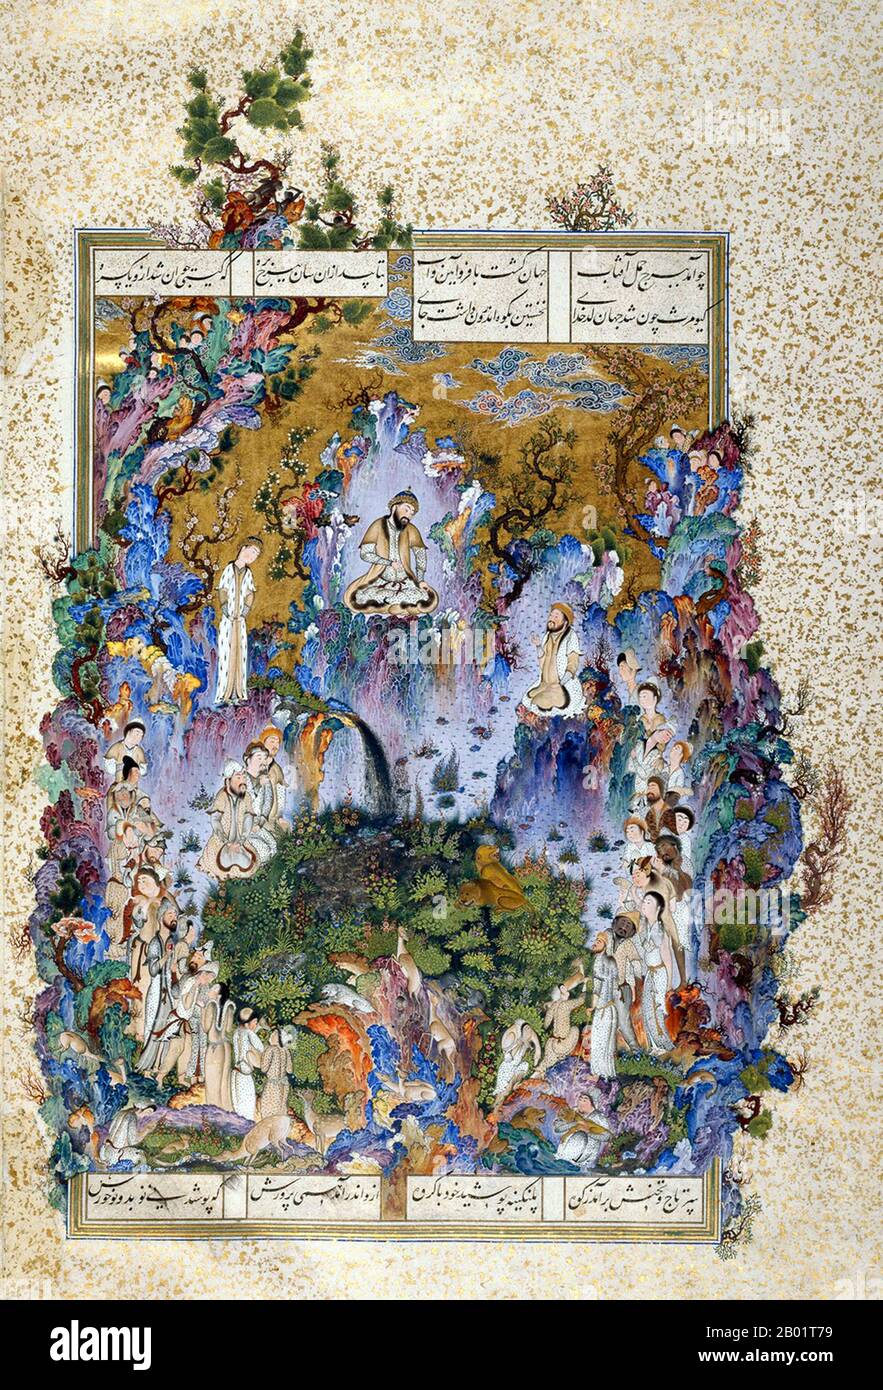 Gayumarth (sometimes Gayumars), first Shah of Iran, is enthroned among his courtiers clad in leopard skins at the opening of the Shahnama-yi Shahi (The King's Book of Kings).  This miniature was probably painted by the court painter Sultan Mohammed, and is considered by some to be the most beautiful image in all Persian art. The picture was painted at the request of Shah Tahmasp. The work was presented by the Safavid ruler to the Ottoman sultan Selim II in 1568. Stock Photo